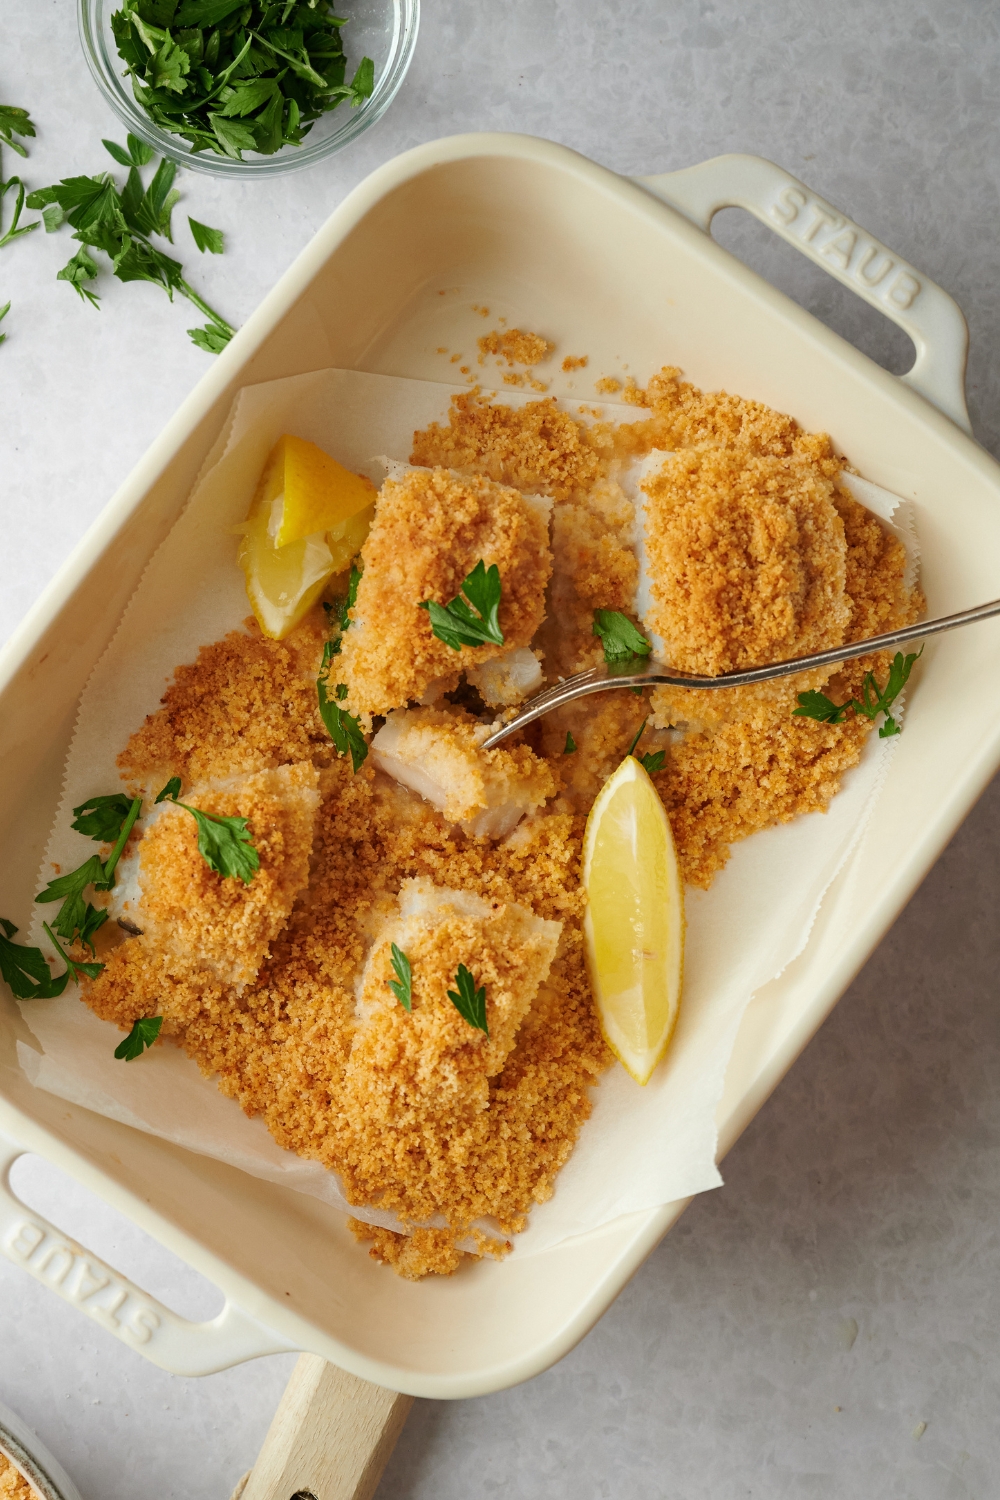 A fork with a piece of haddock on it in a baking dish that is lined with parchment paper with four breaded haddocks in it.